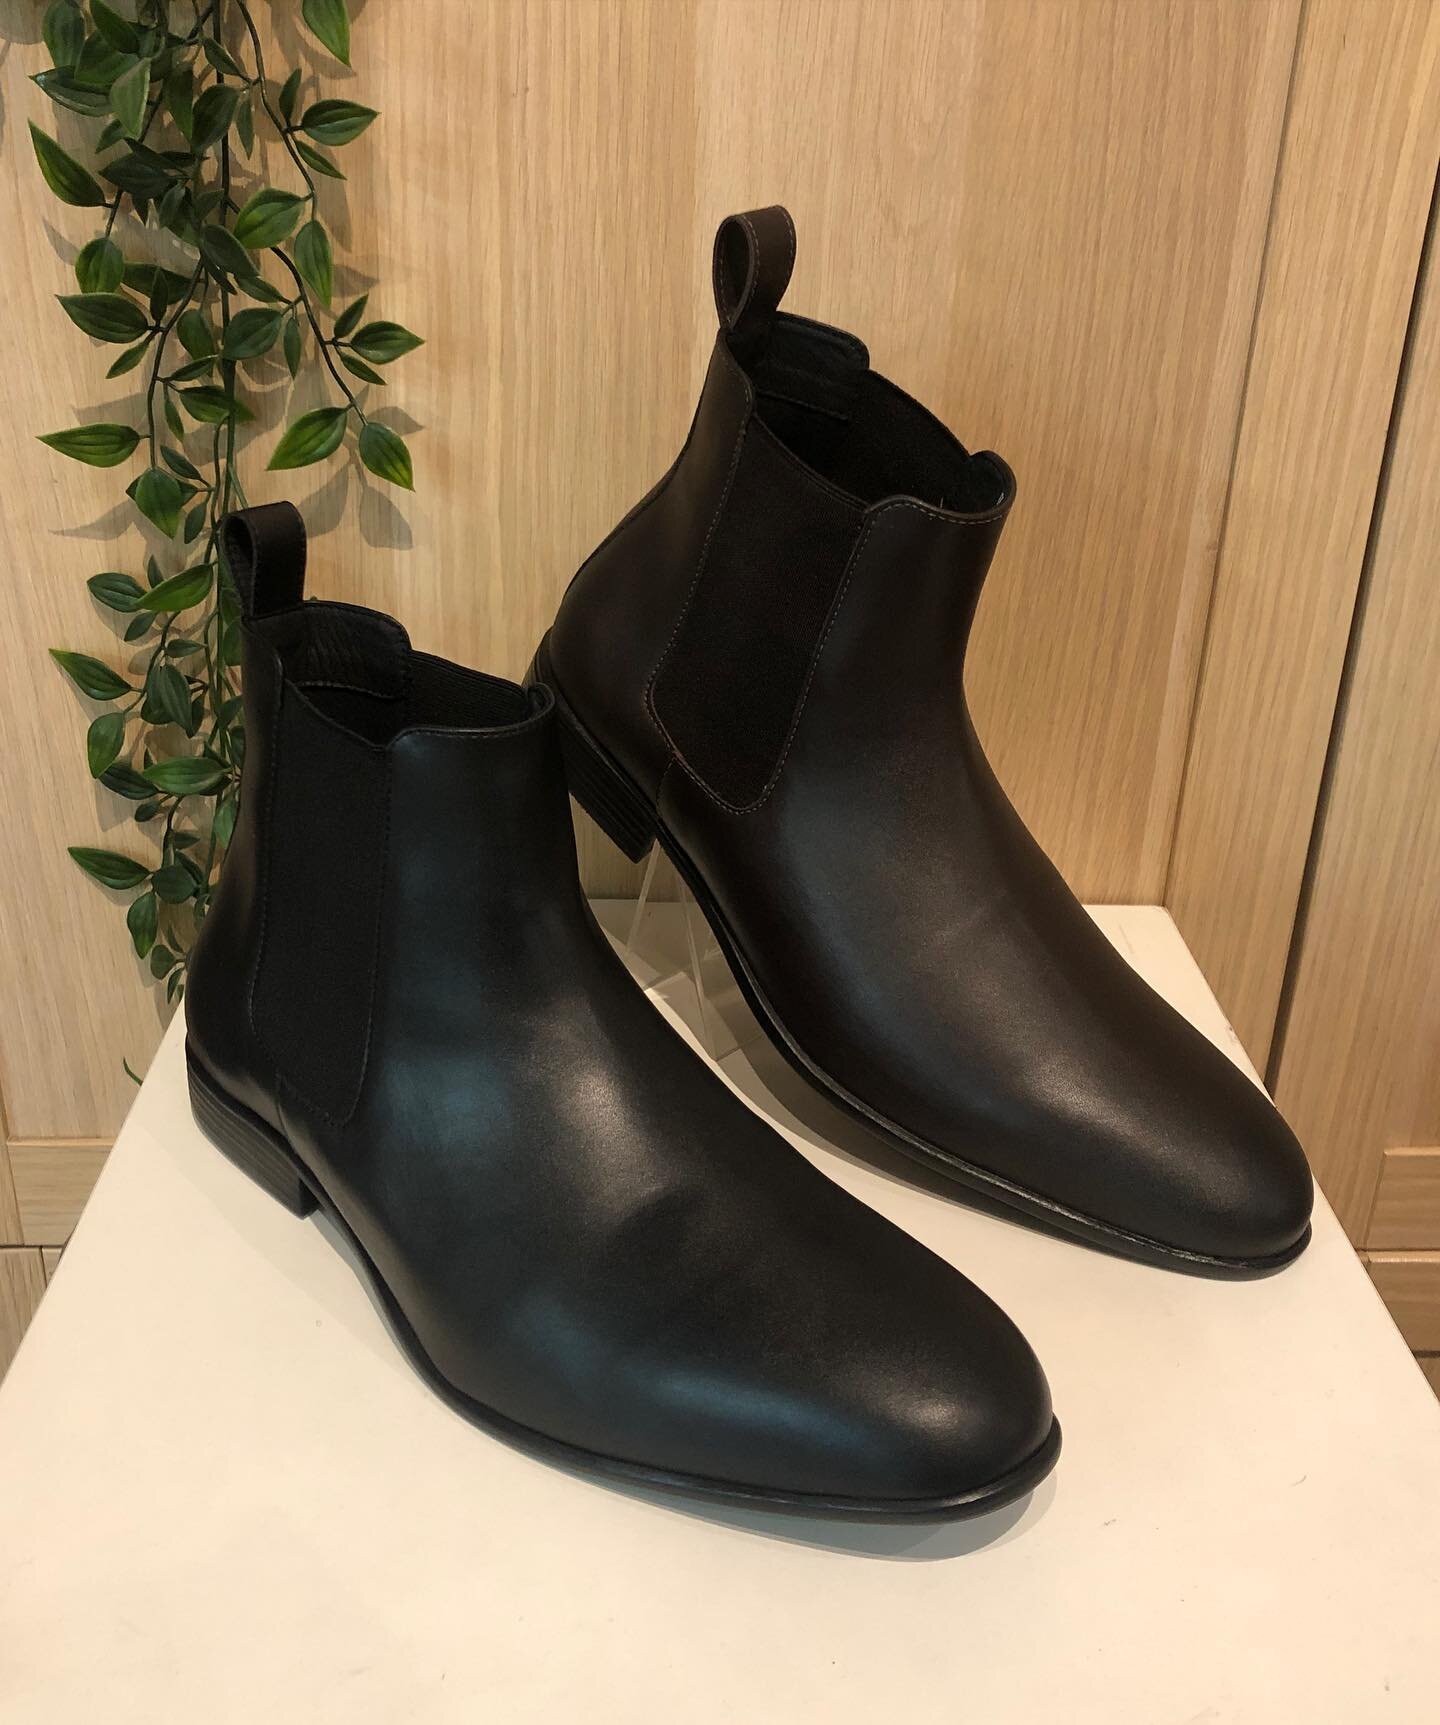 Our very own Chelsea boots by in-house label Zette are now available in our collection. 

Introducing &lsquo;Harry&rsquo; - a timeless style crafted from premium Oeko-Tex certified vegan leather uppers, paired with high-quality flexible rubber outsol